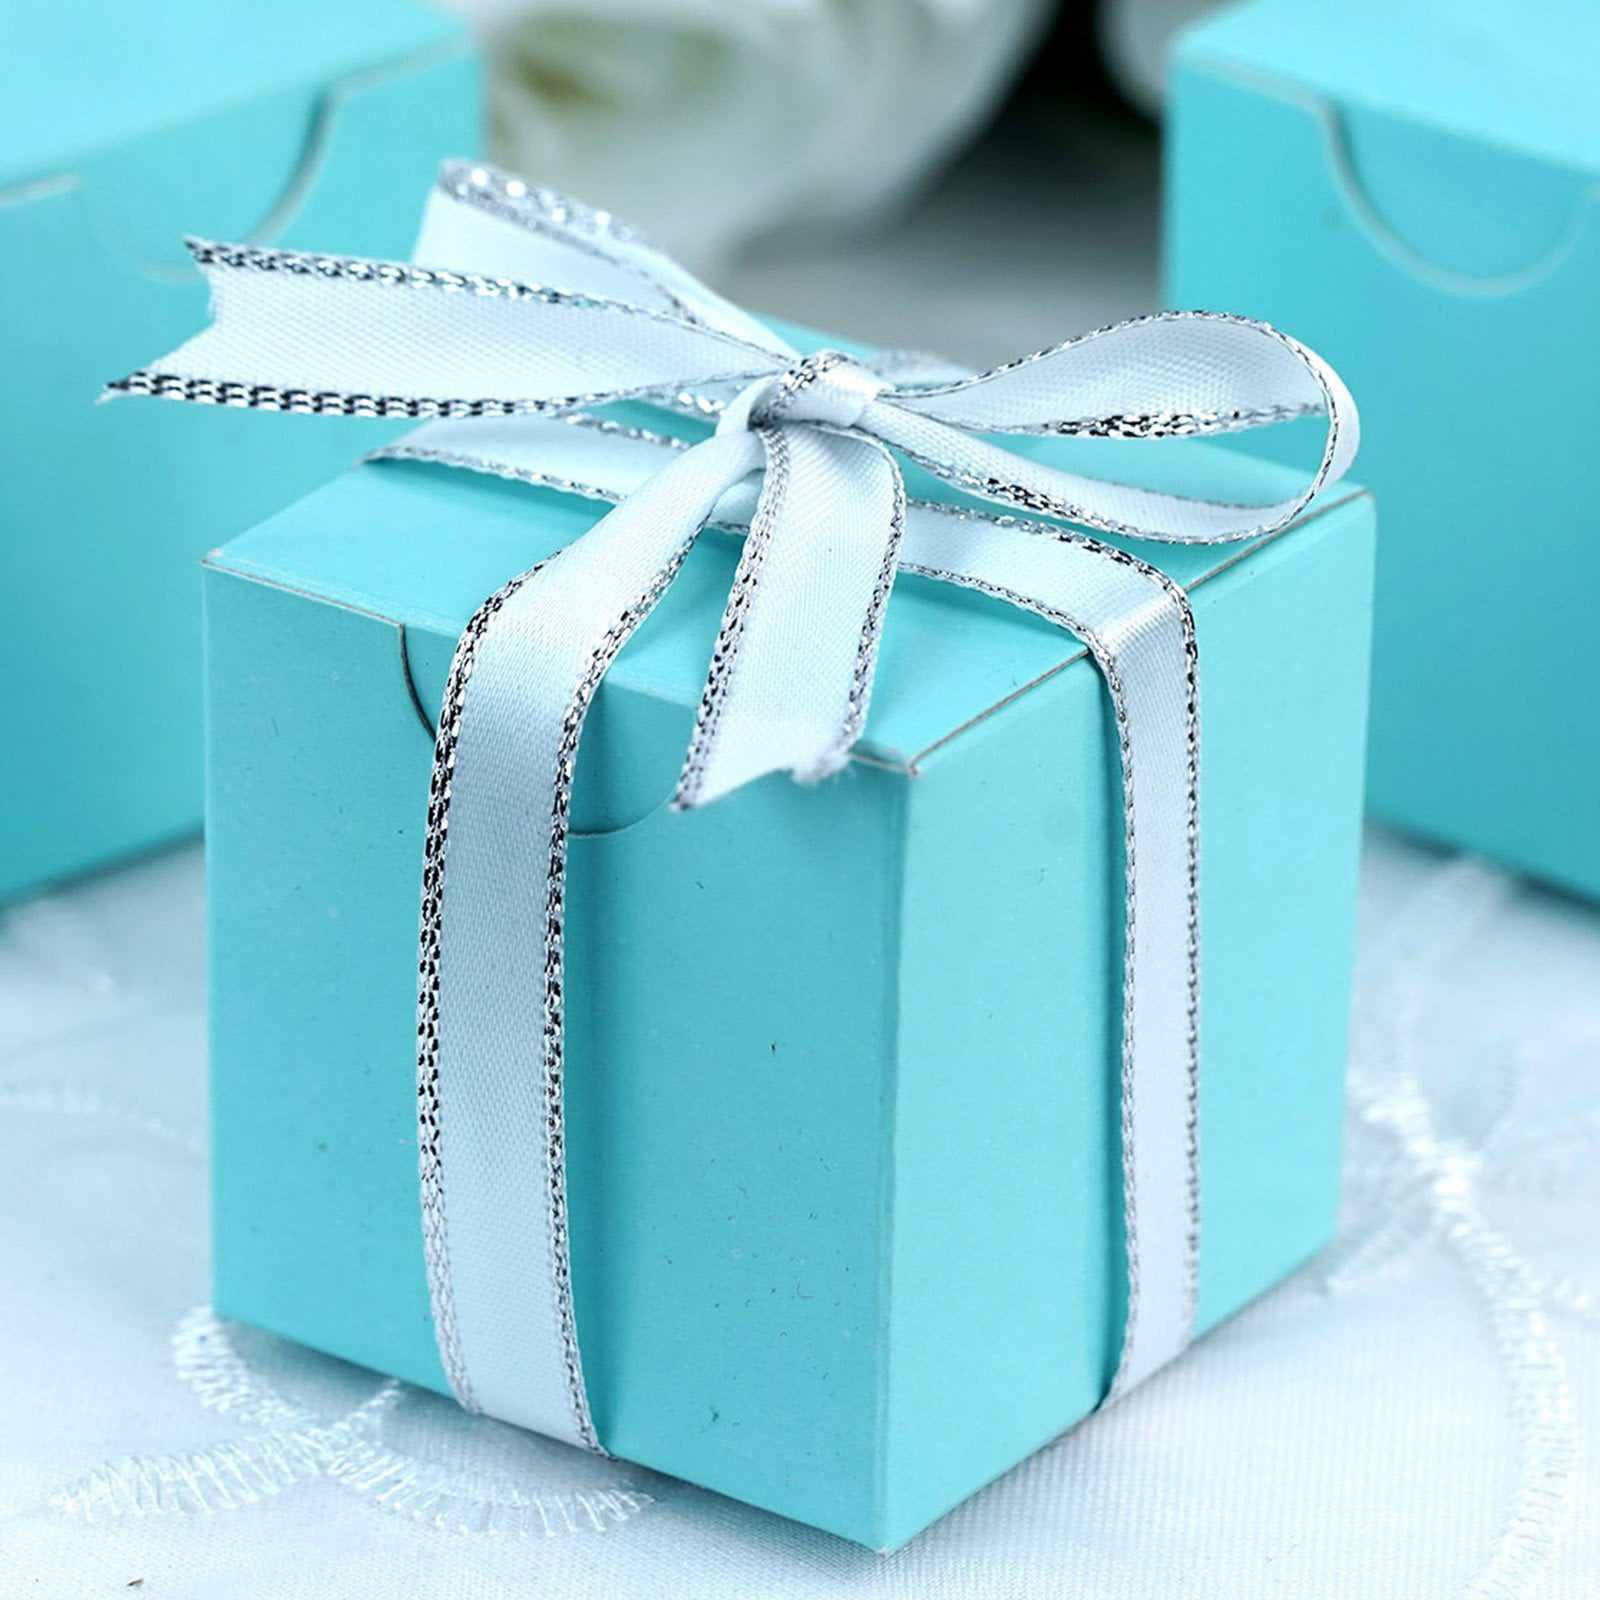 TURQUOISE AND FUSCHIA SQUARE BOX AND LID WEDDING FAVOUR BOXES CHOOSE QUANTITY